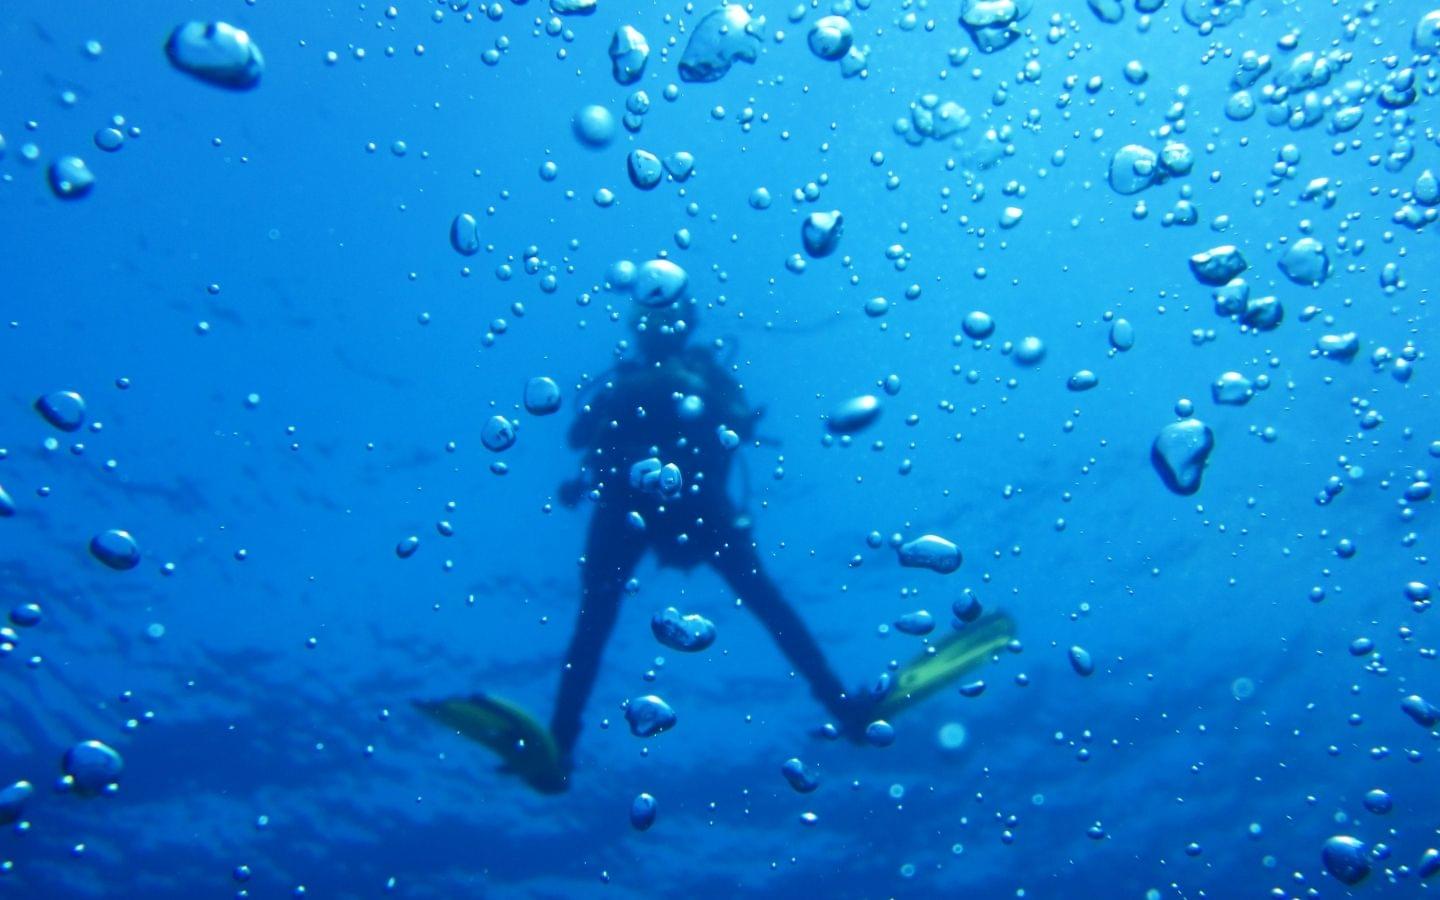 Flying after scuba diving: Why you should wait